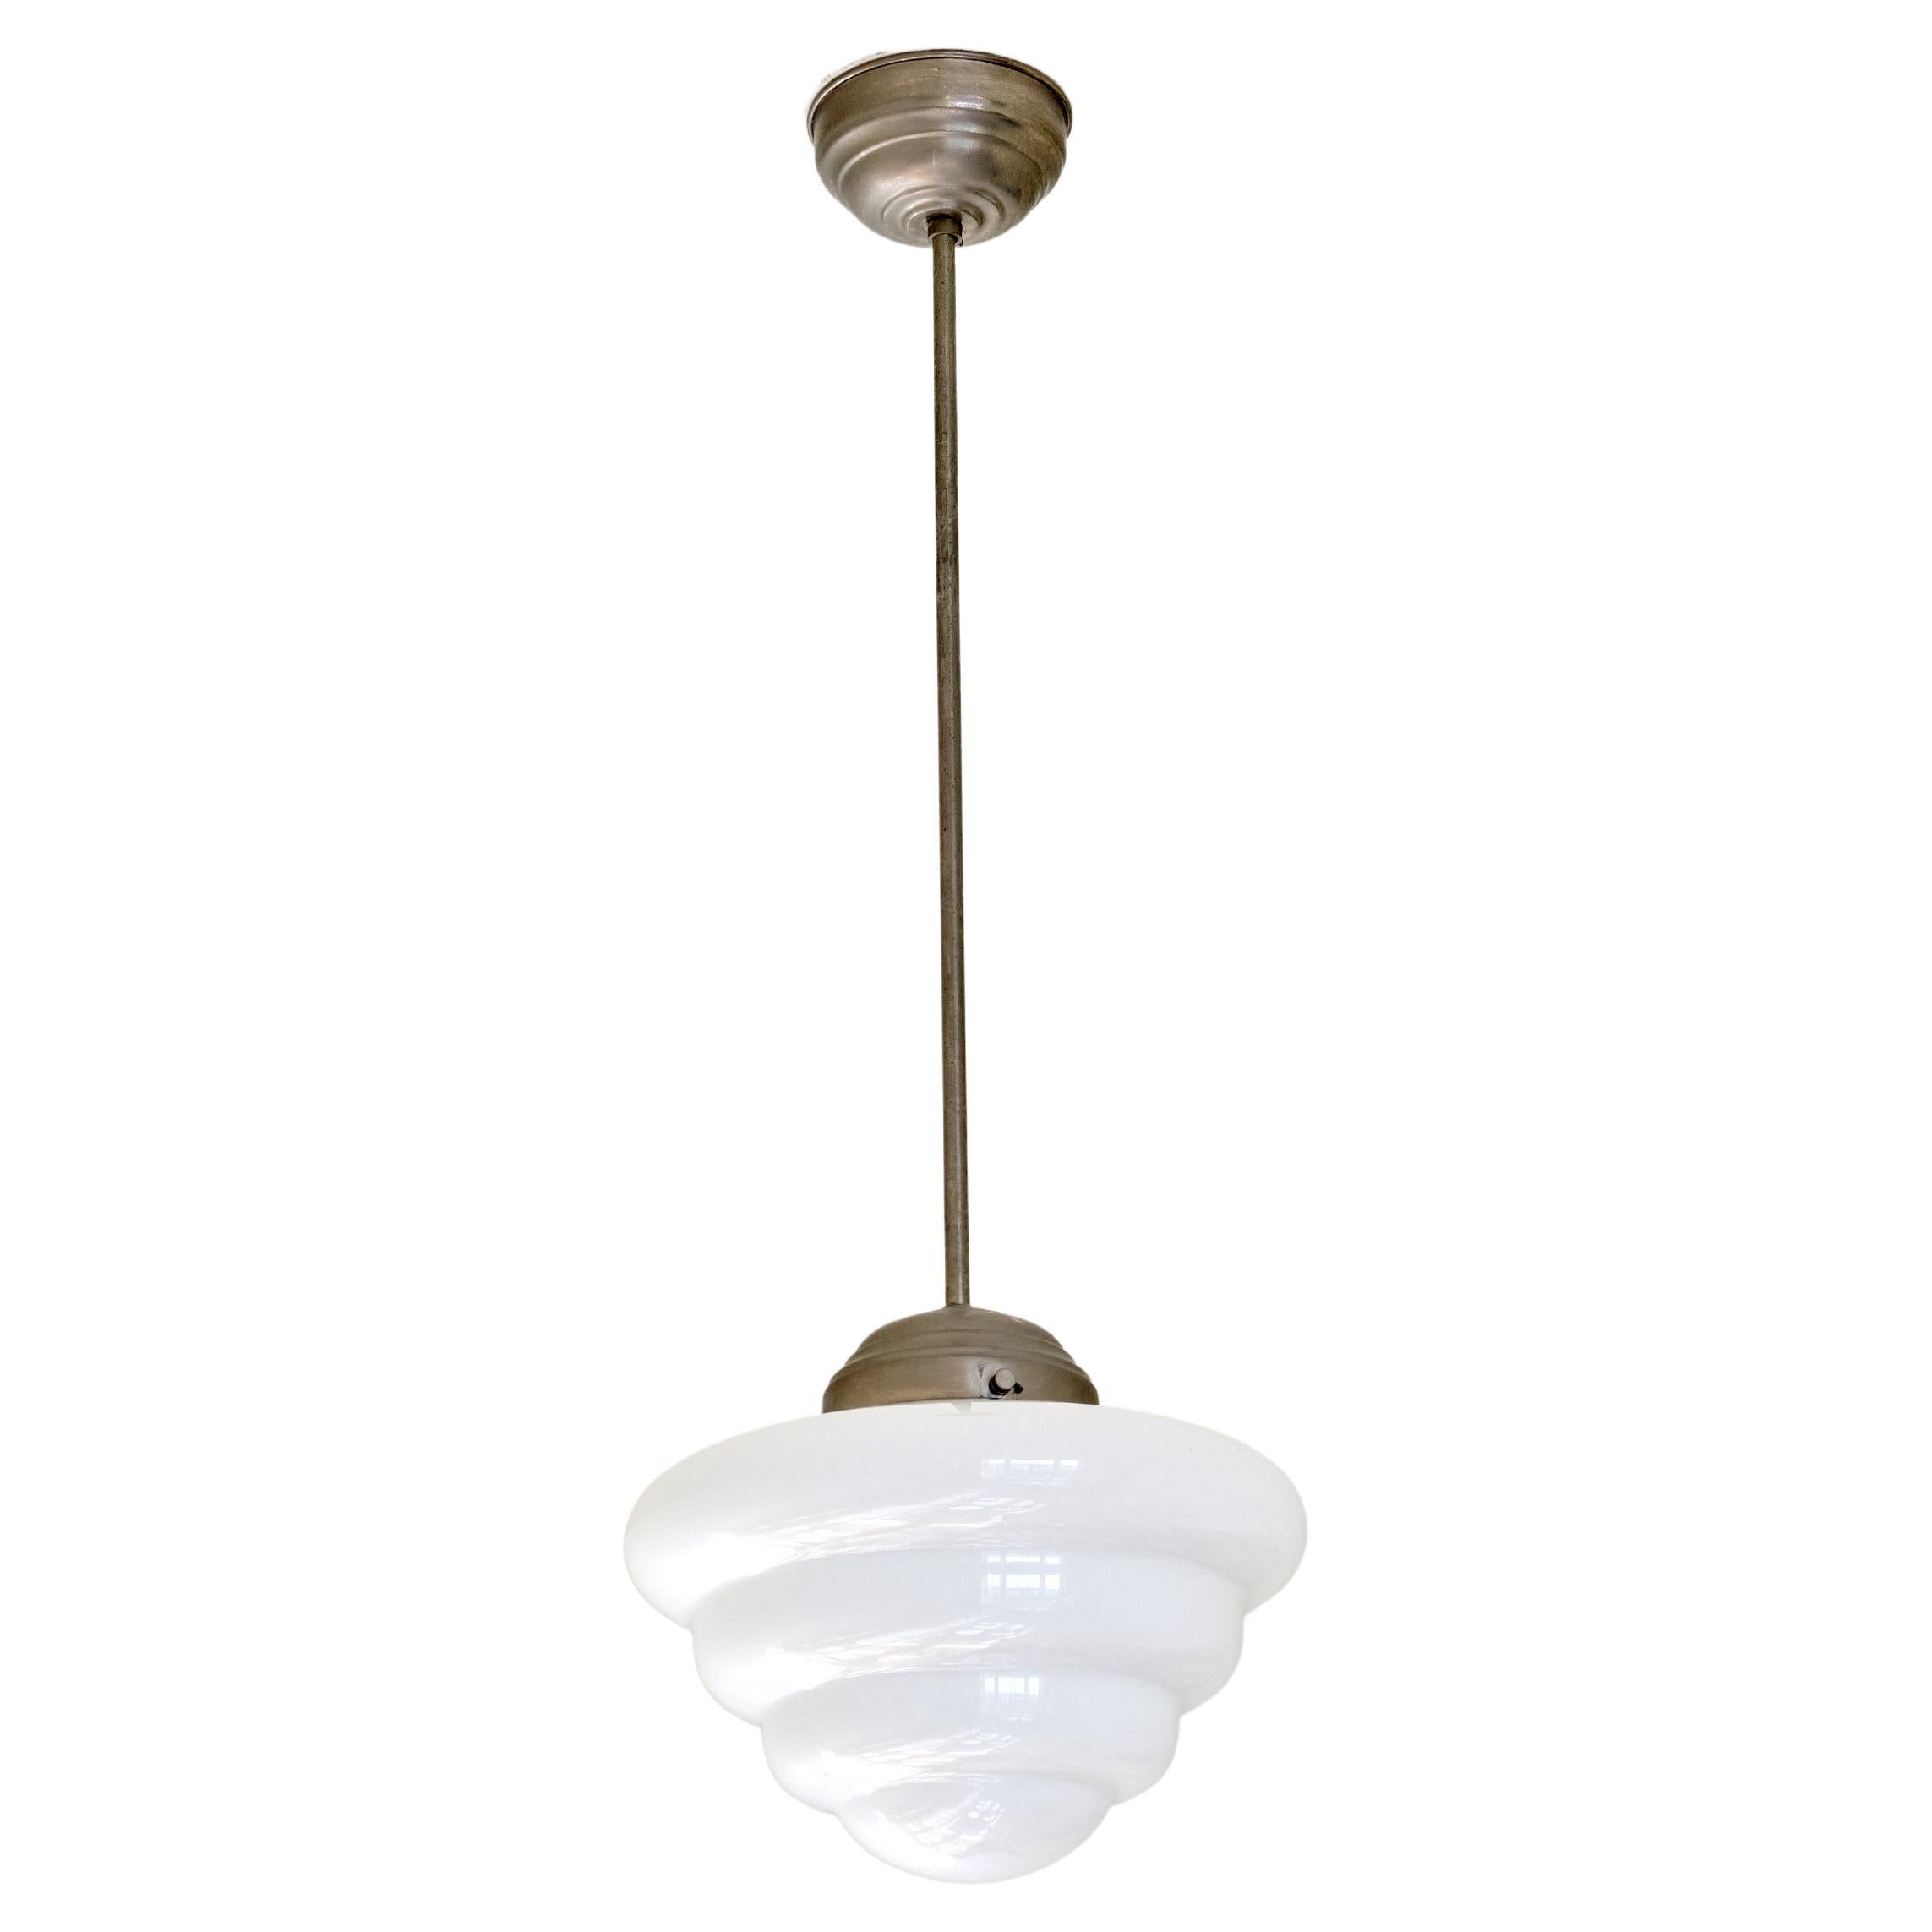 Gispen 'Michelin' Tiered Pendant Light with Opal Glass Shade, Netherlands, 1930s